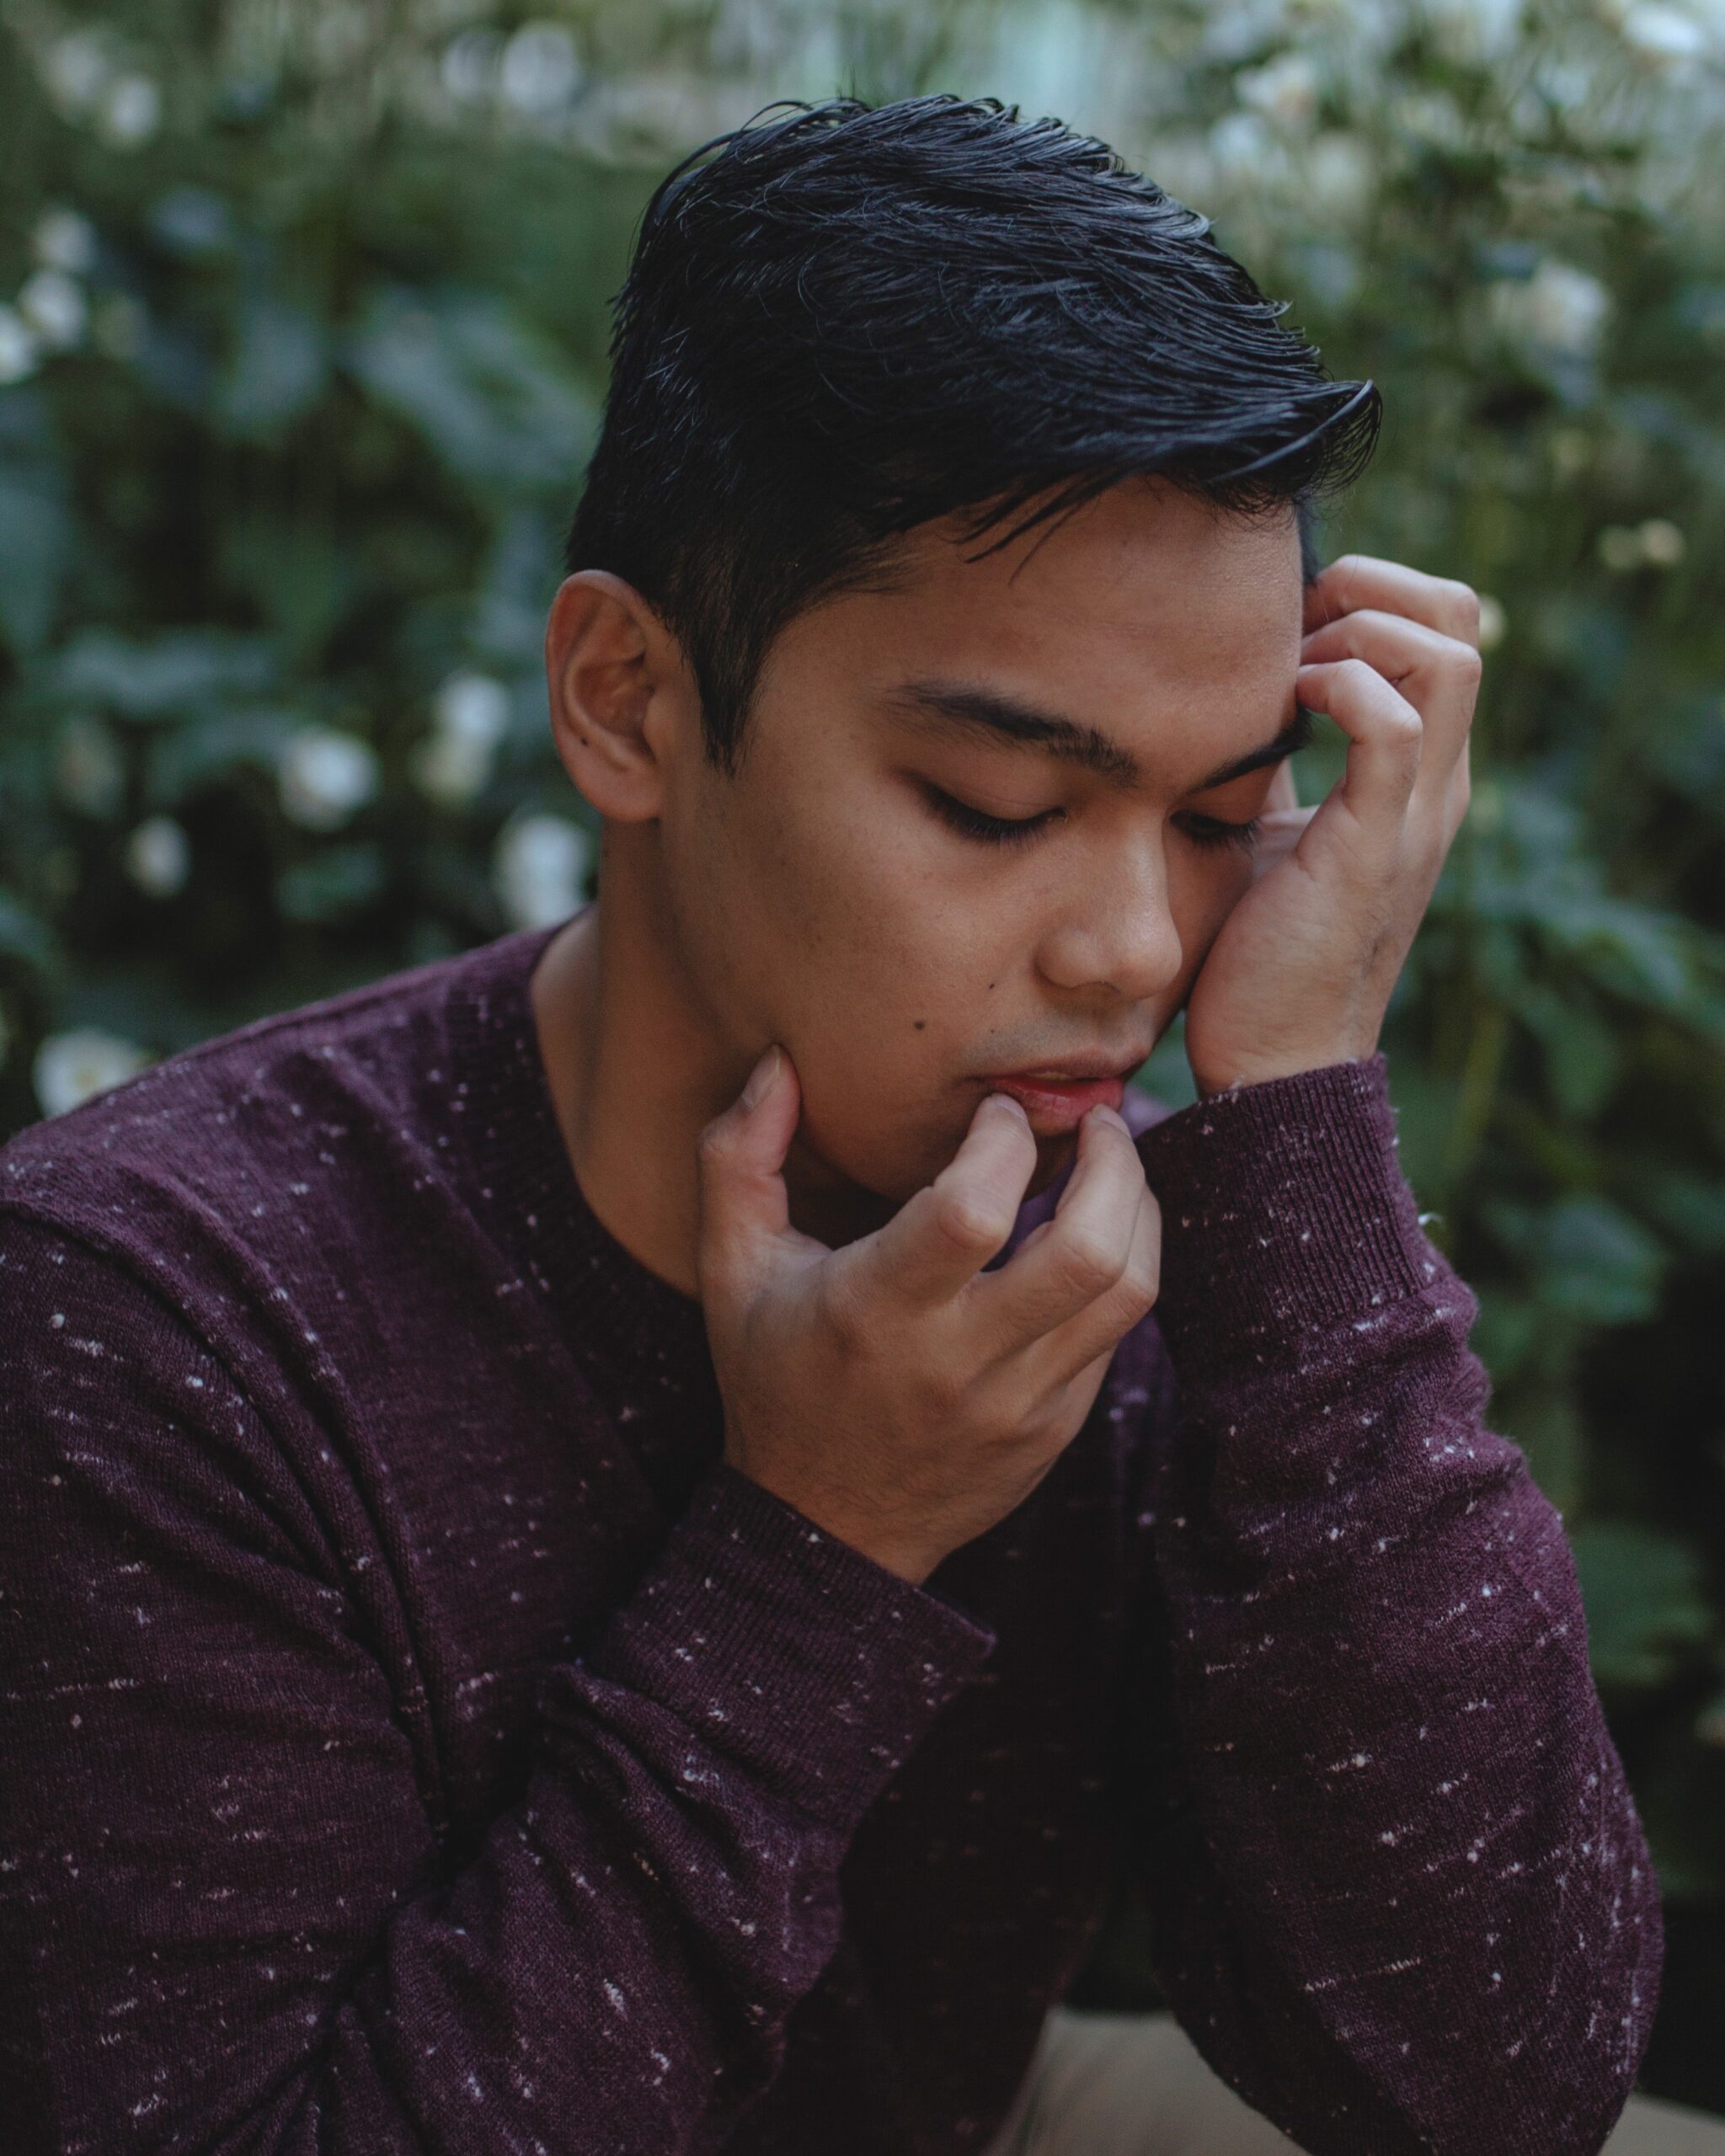 A side profile of Miggy, a brown-skinned man wearing a long-sleeved maroon shirt speckled with grey. He is in front of a bush, looking down with eyes closed, as his fingers gently crawl over his face.